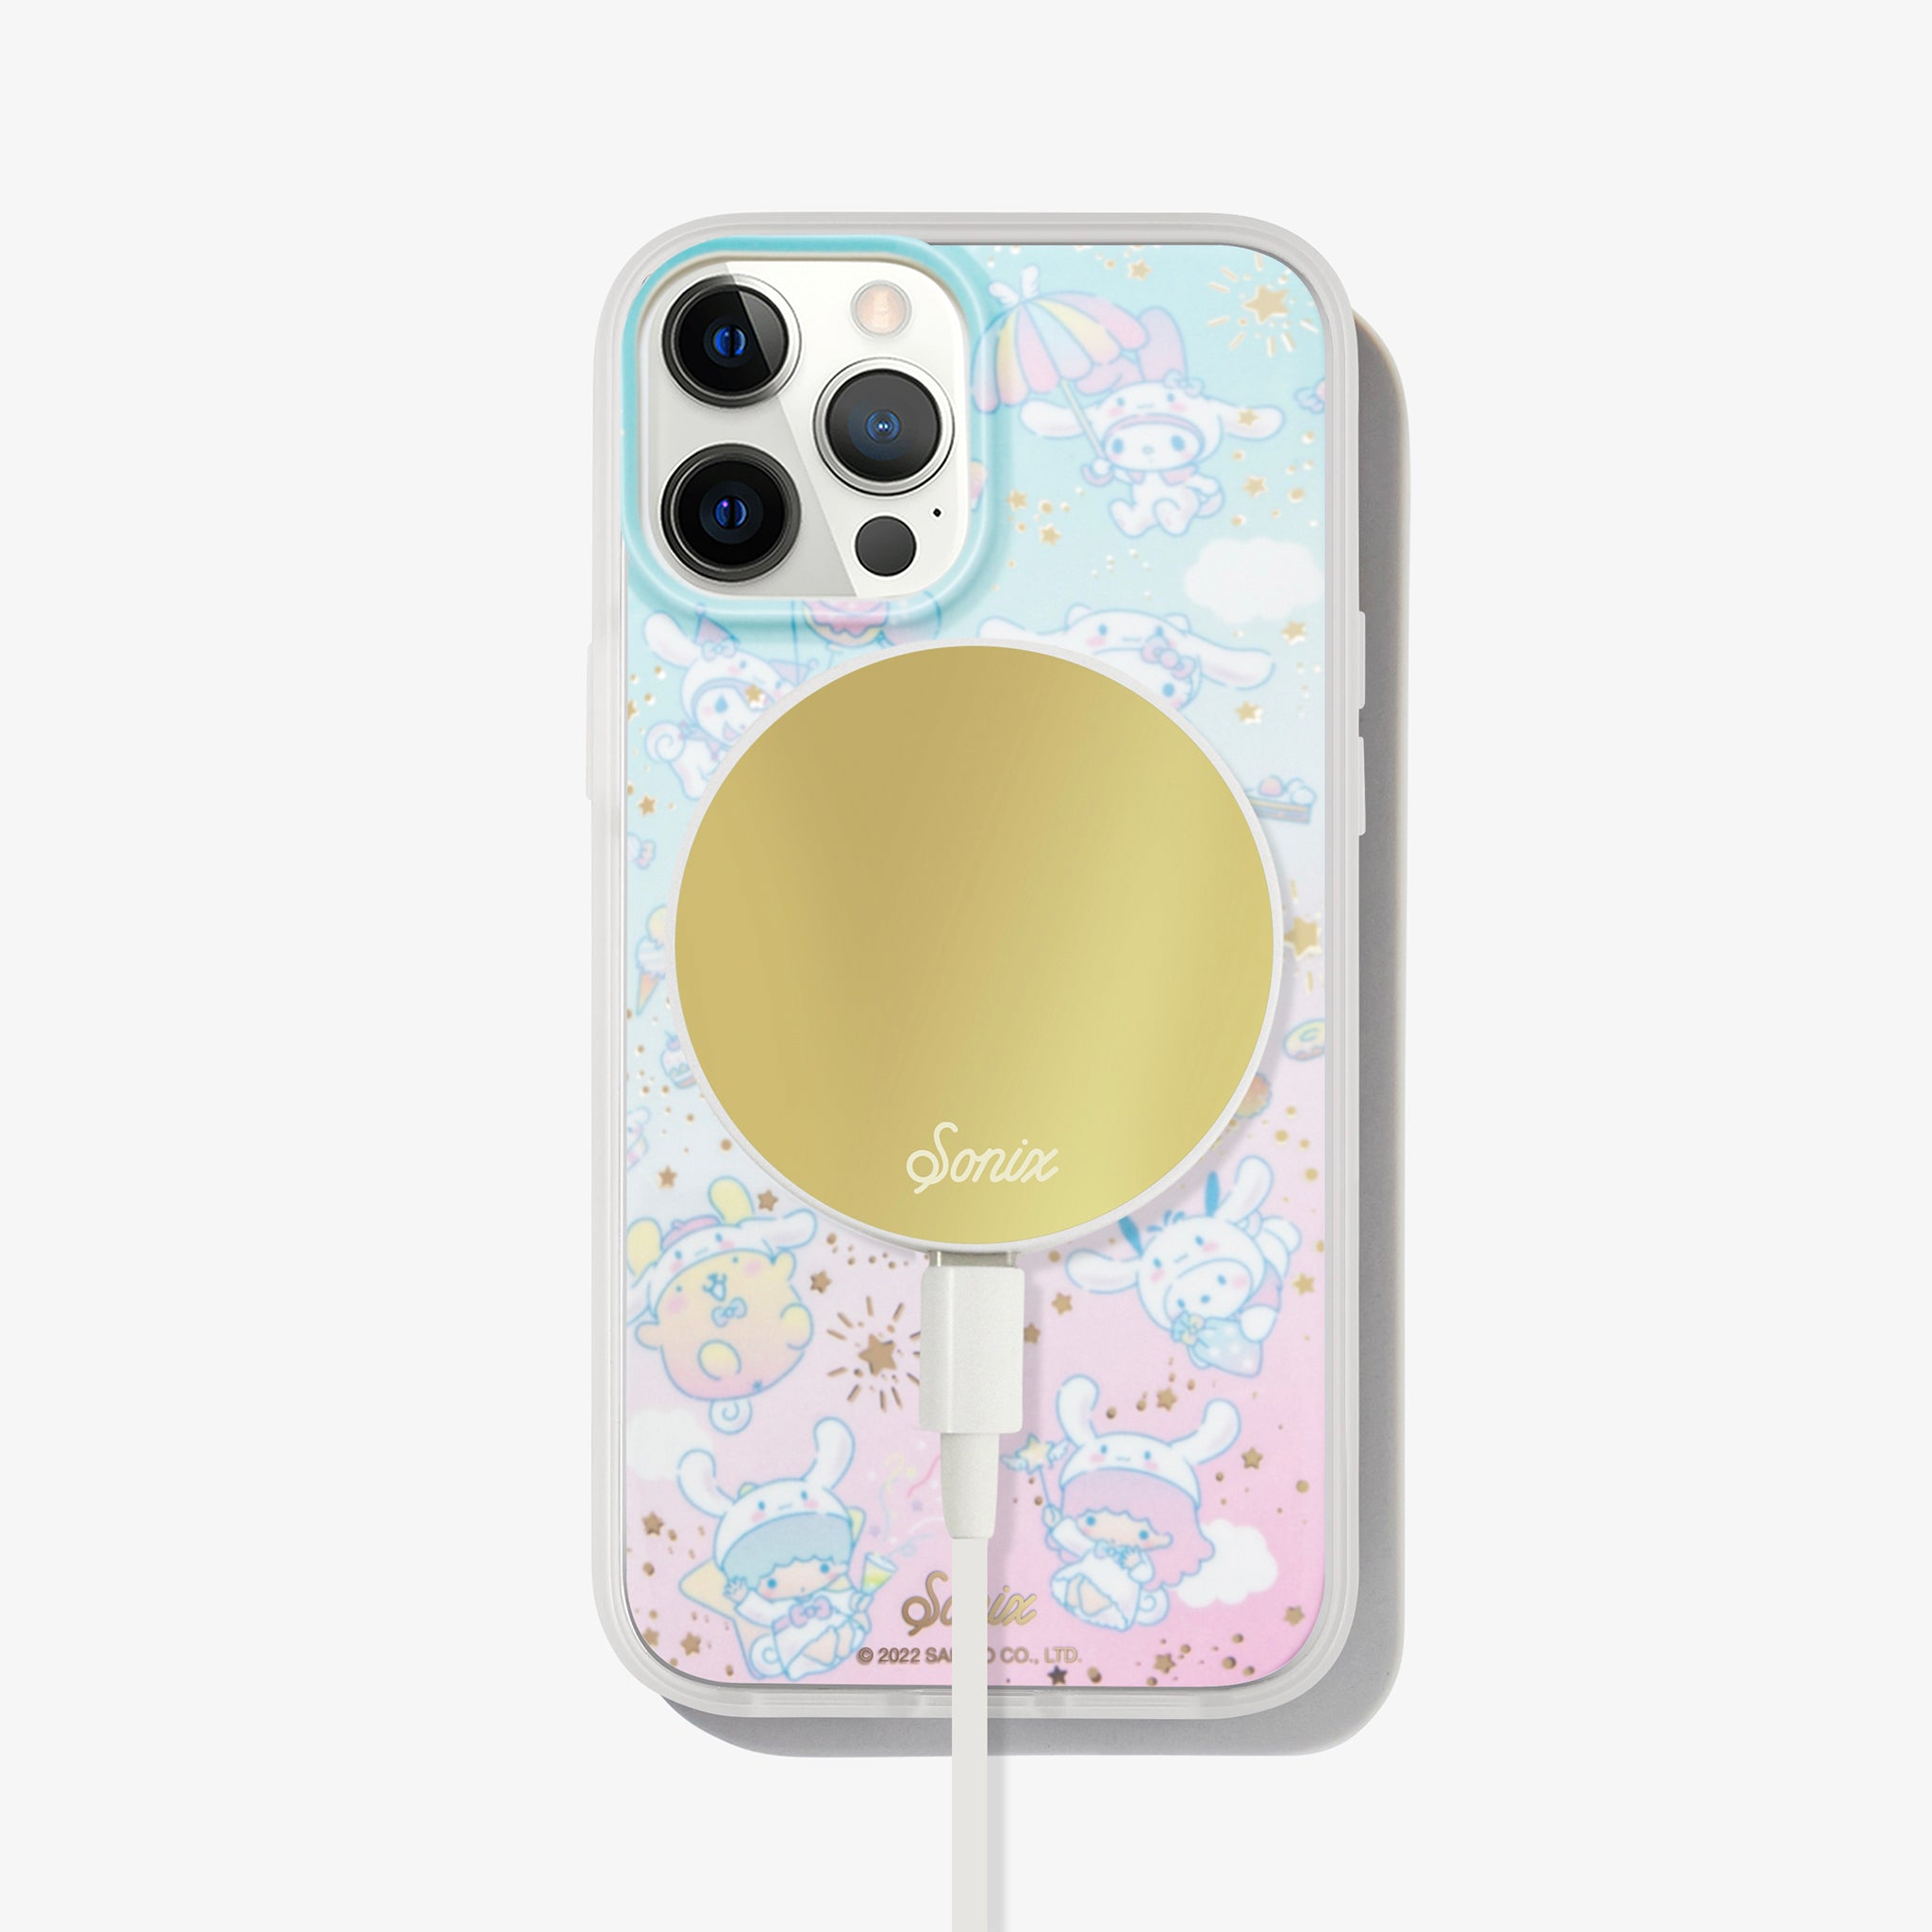 Pink and blue iphone case with gold stars, clouds, and hello kitty character cinnamoroll on an iphone 12 pro with gold magsafe charger on the back 